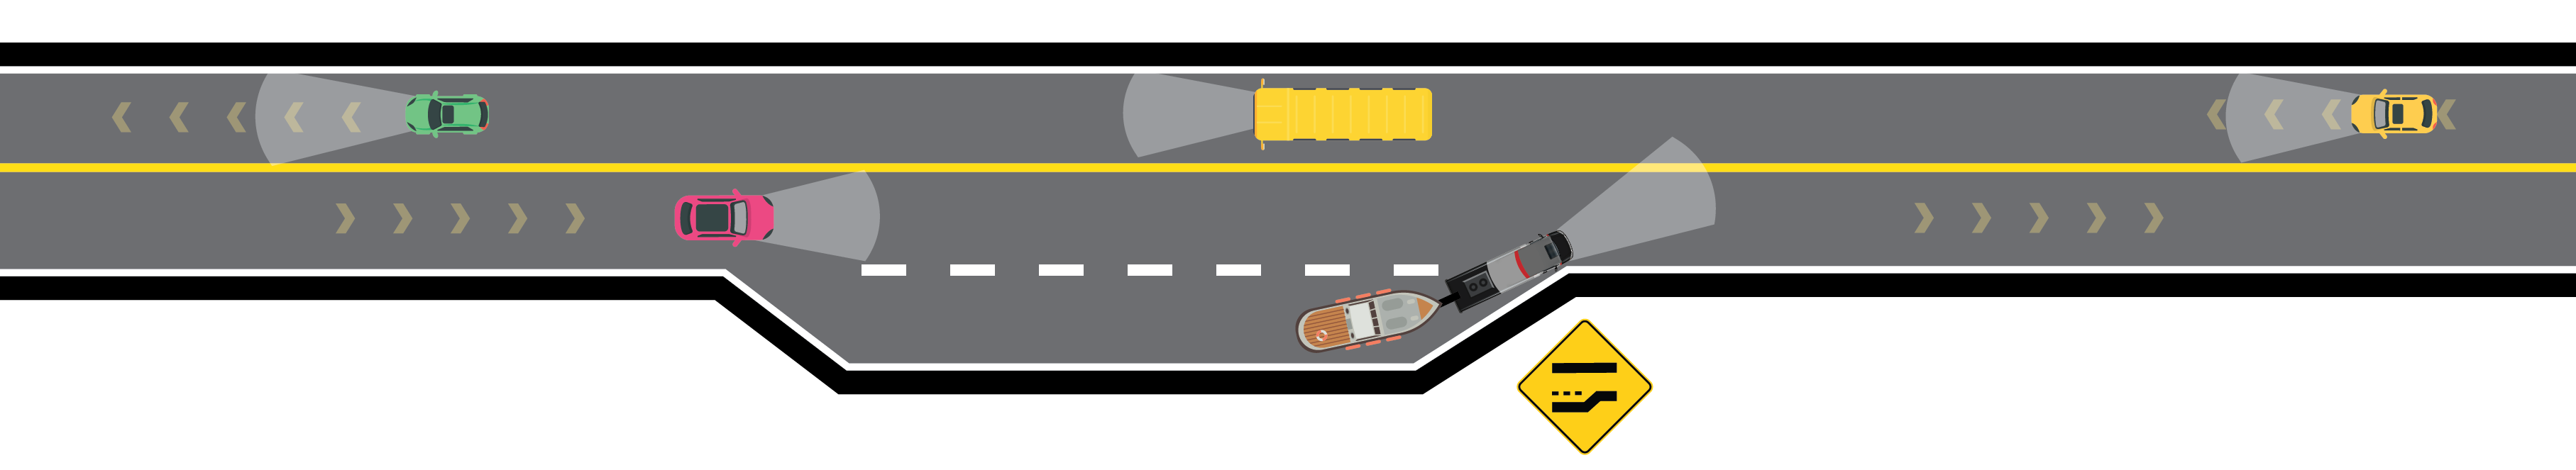 Graphic of alternating passing lanes along the outside lanes.